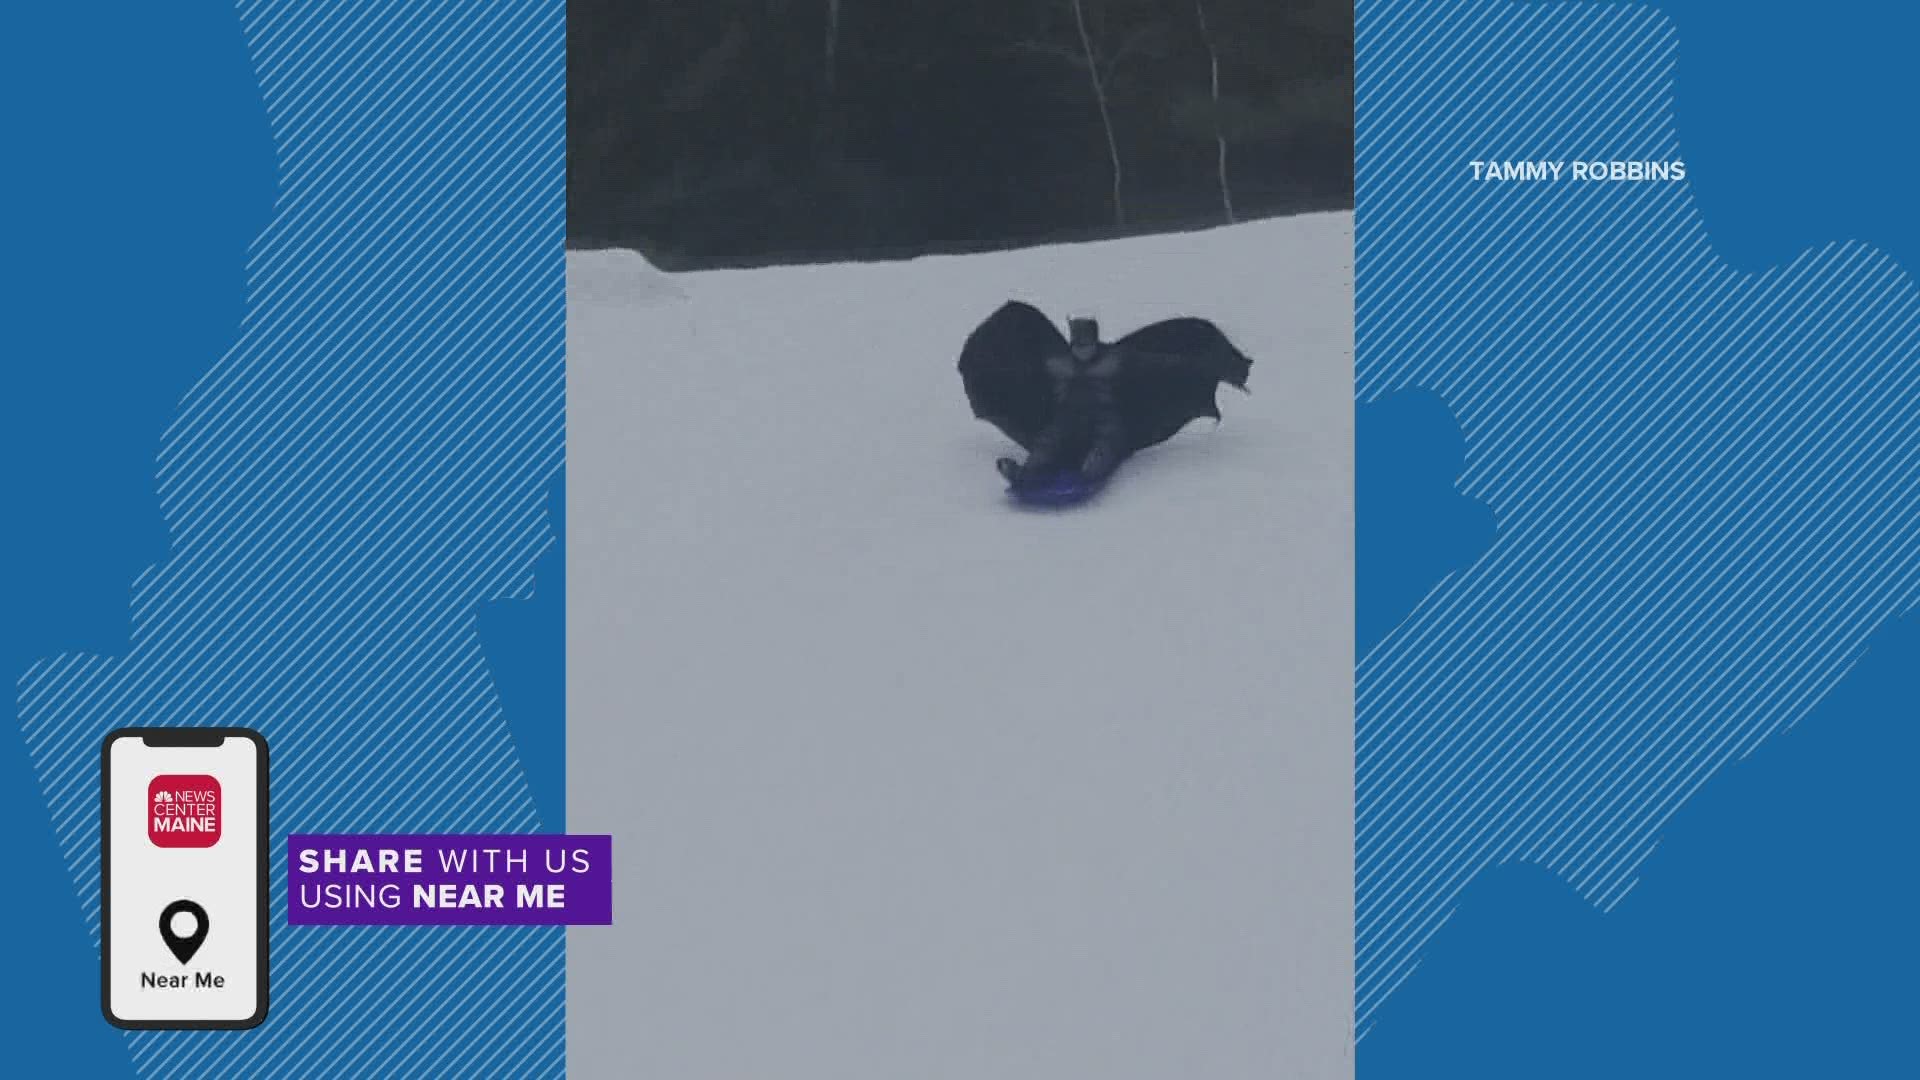 Batman was caught enjoying the snow. Even heroes need to have fun after fighting crime.